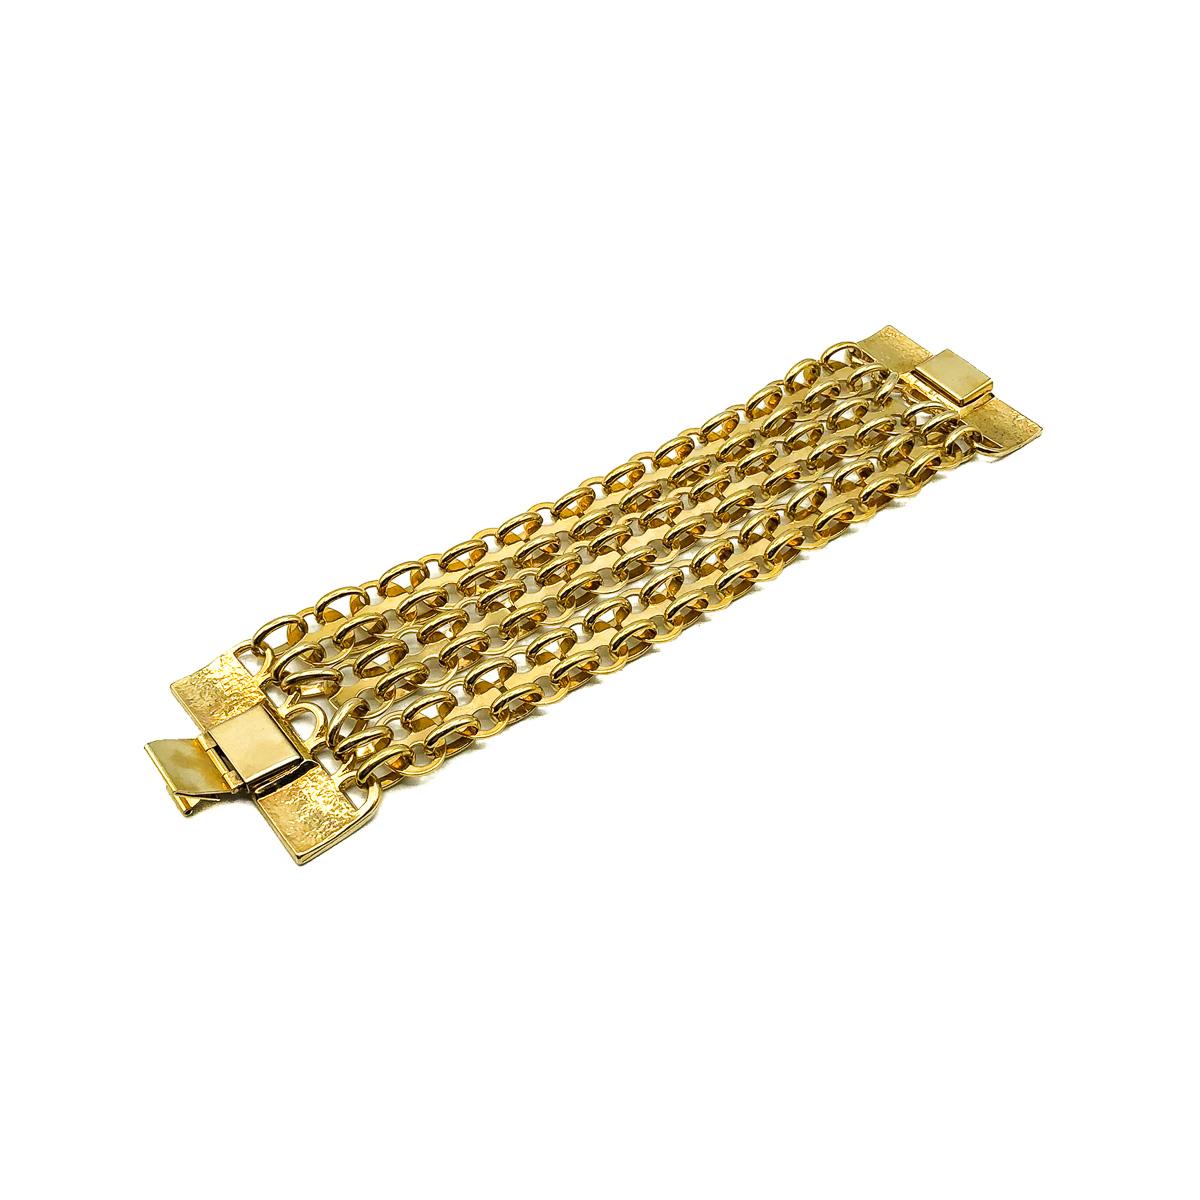 A Vintage Paco Rabanne Bracelet oozing the bold metallic sculptural style now so iconic of this cutting edge Parisian Fashin House. Featuring triple ornate chains in a chain mail formation suspended from statement logo clasps. Crafted in gold plated